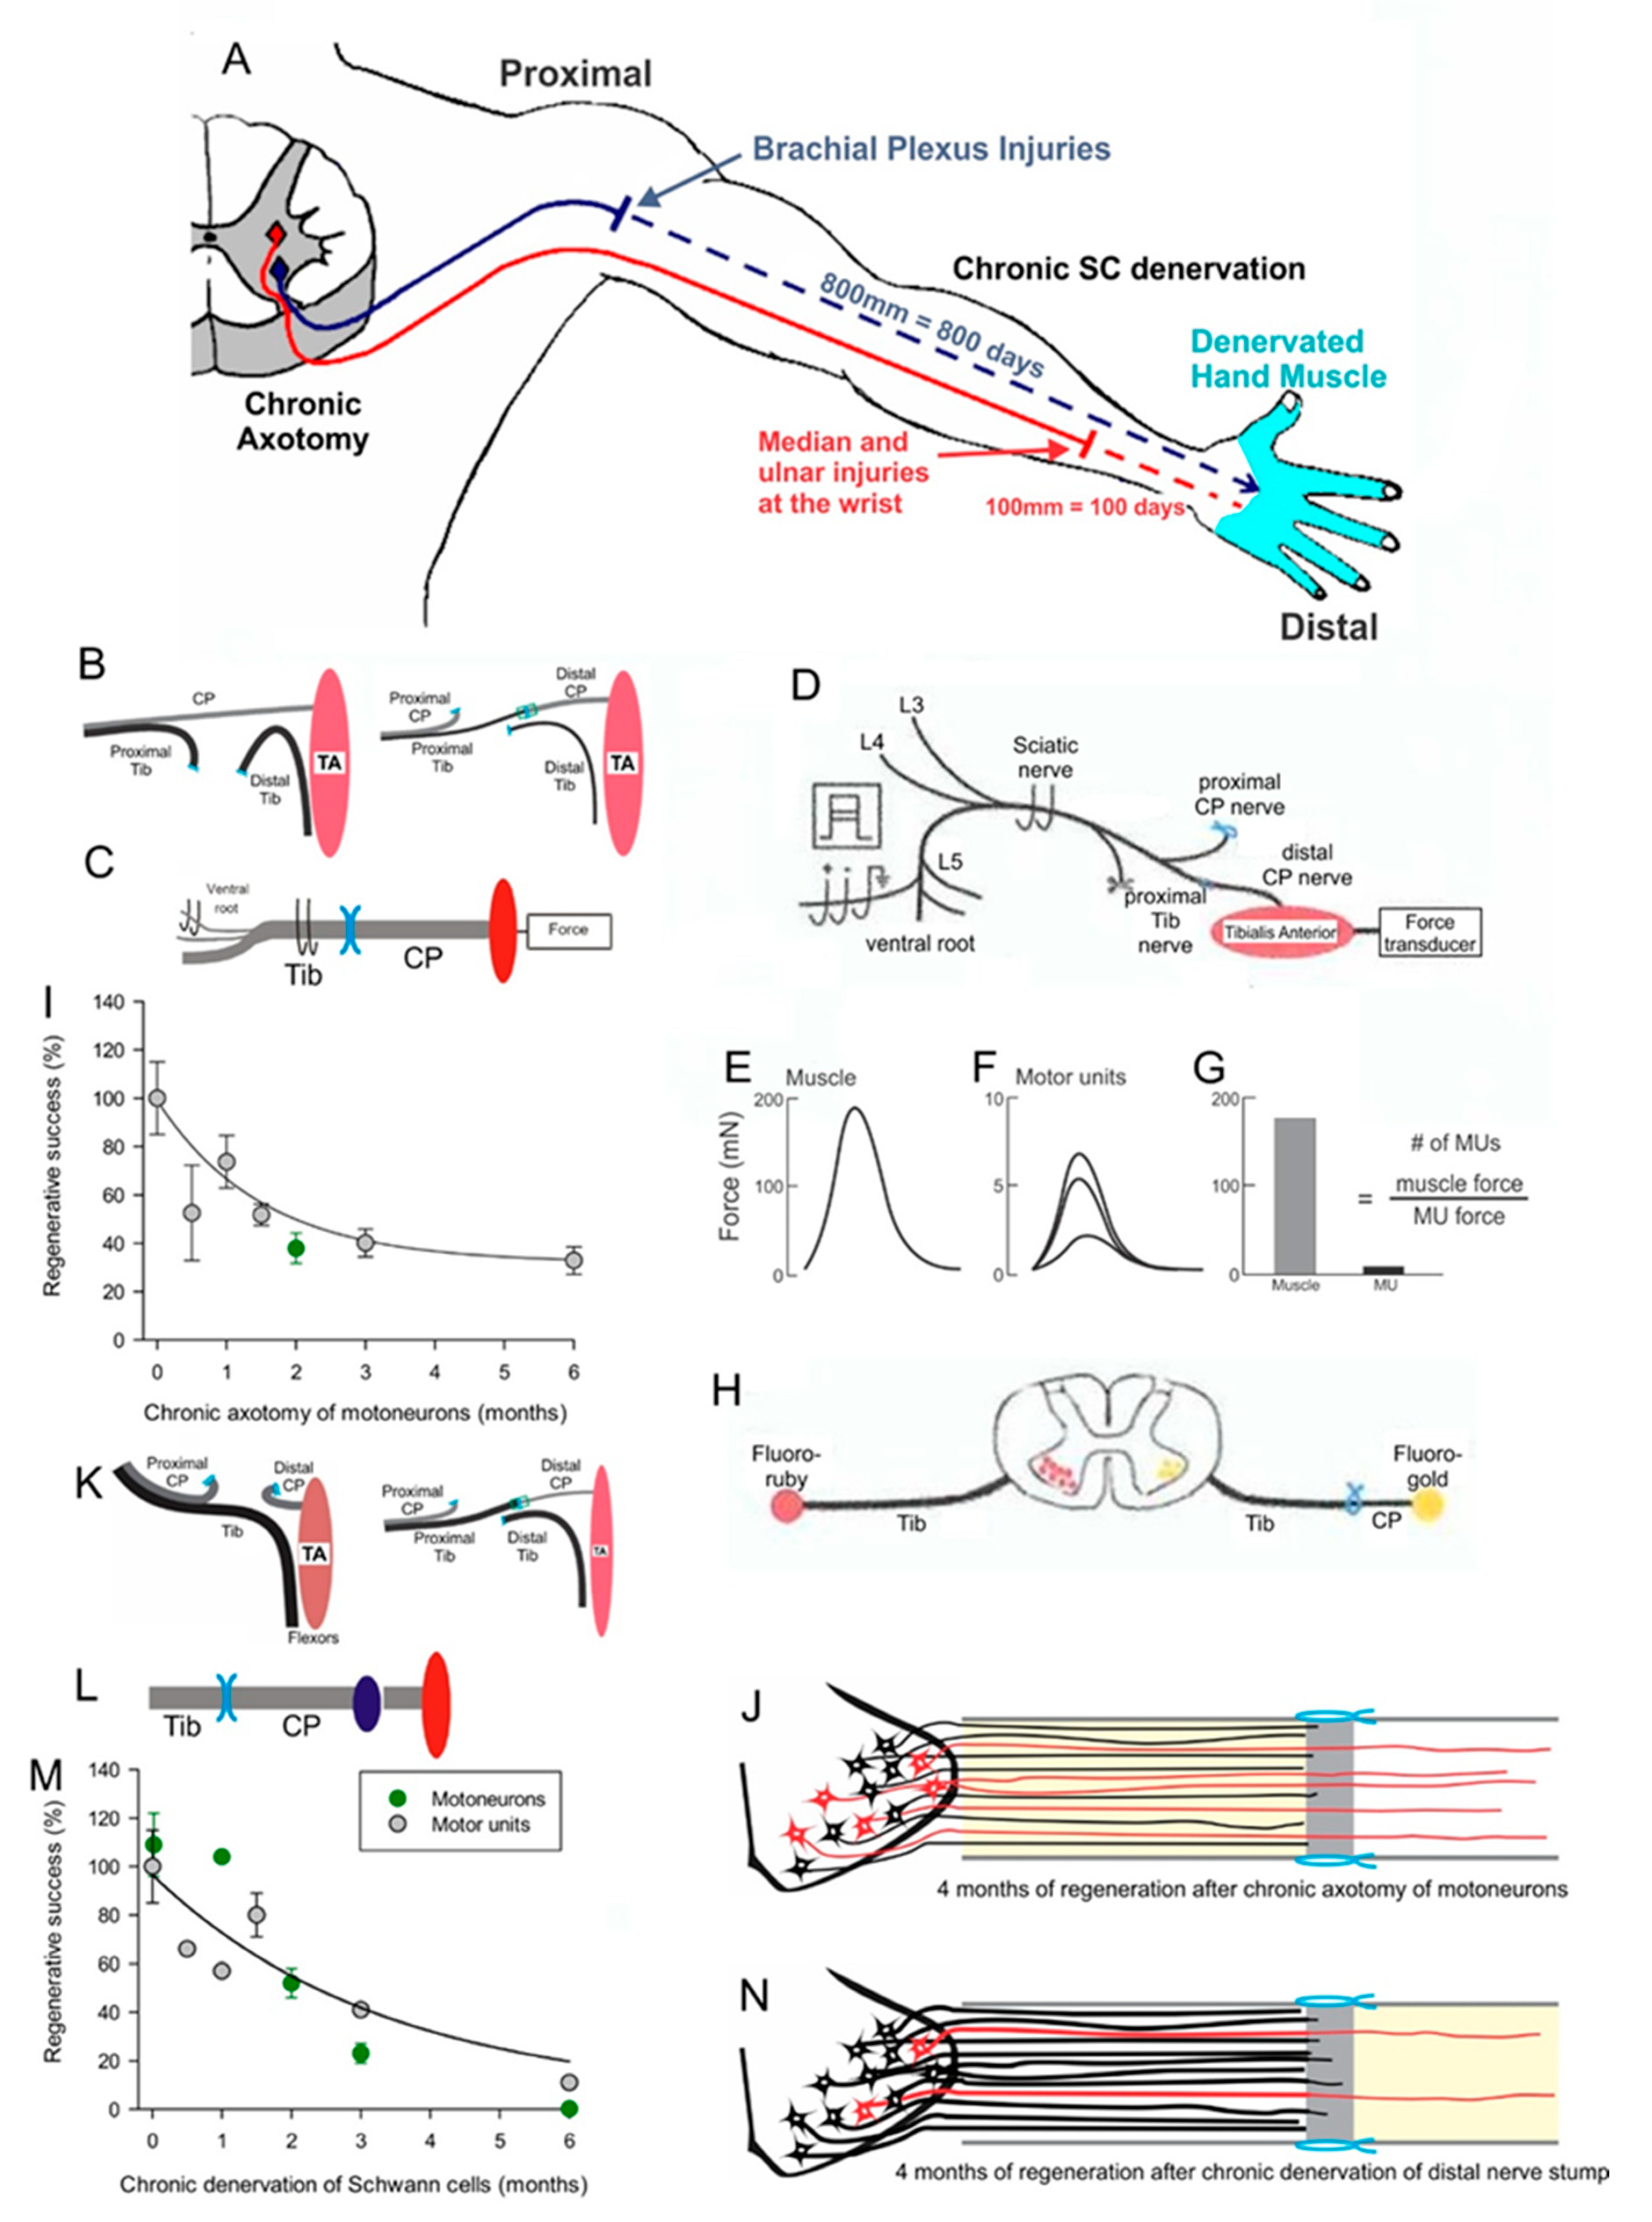 Nerve regeneration and muscle reinnervation. Neuromuscular electrical